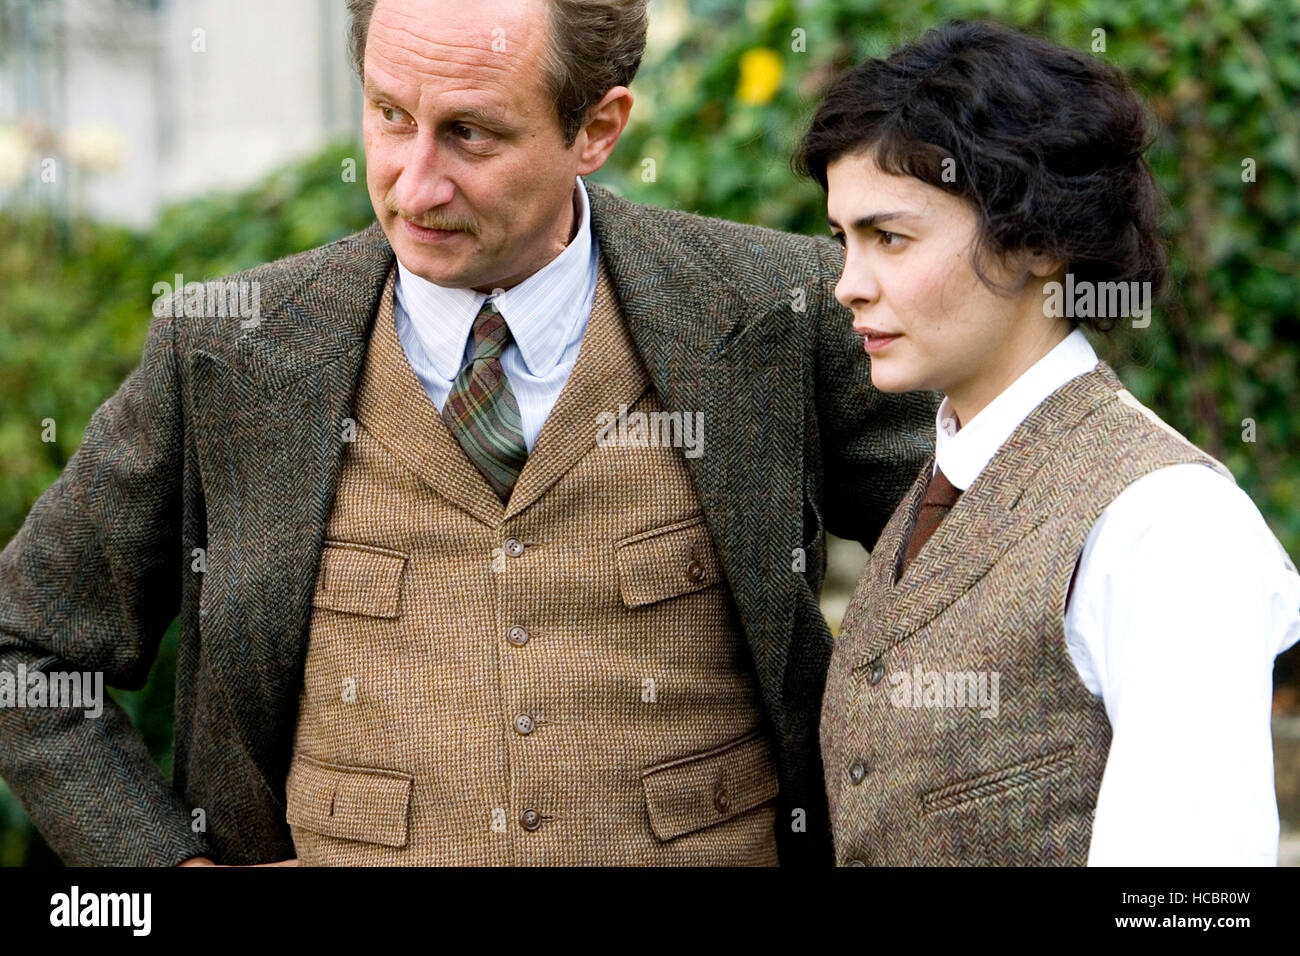 COCO BEFORE CHANEL, (aka COCO AVANT CHANEL), from left: Benoit Poelvoorde,  Audrey Tautou as Coco Chanel, 2009. Ph: Chantal Stock Photo - Alamy